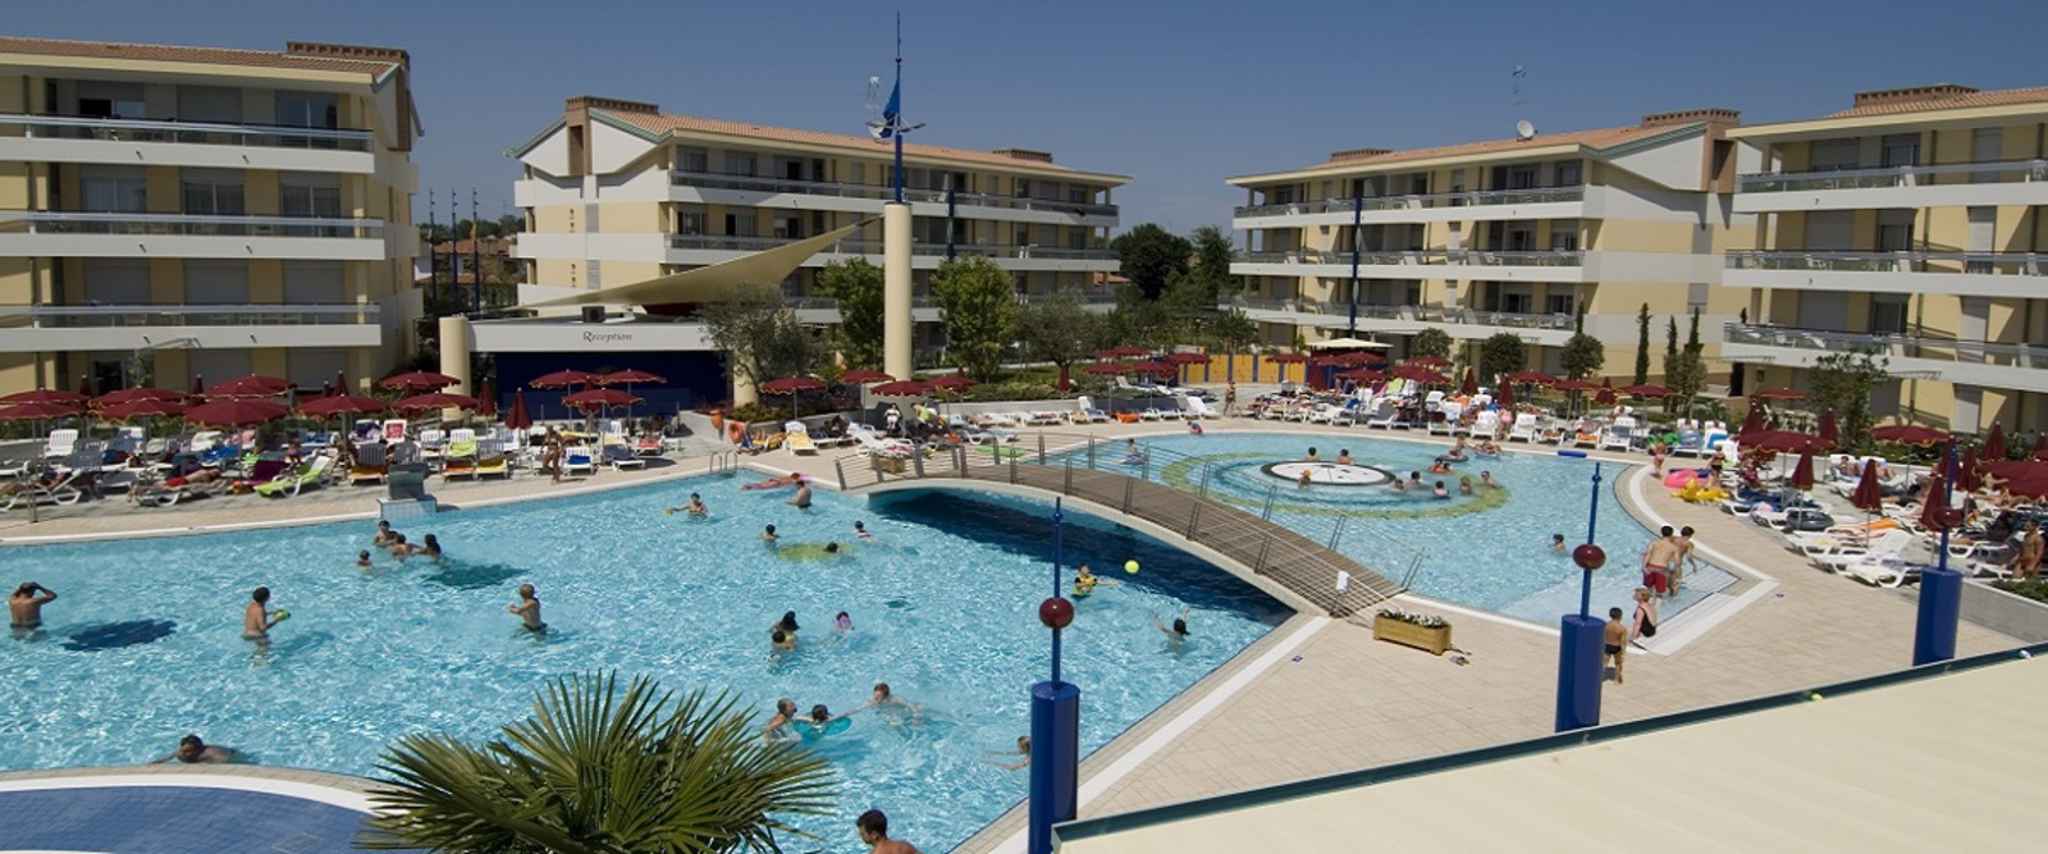 Hotelapartment mit Pool  in Europa